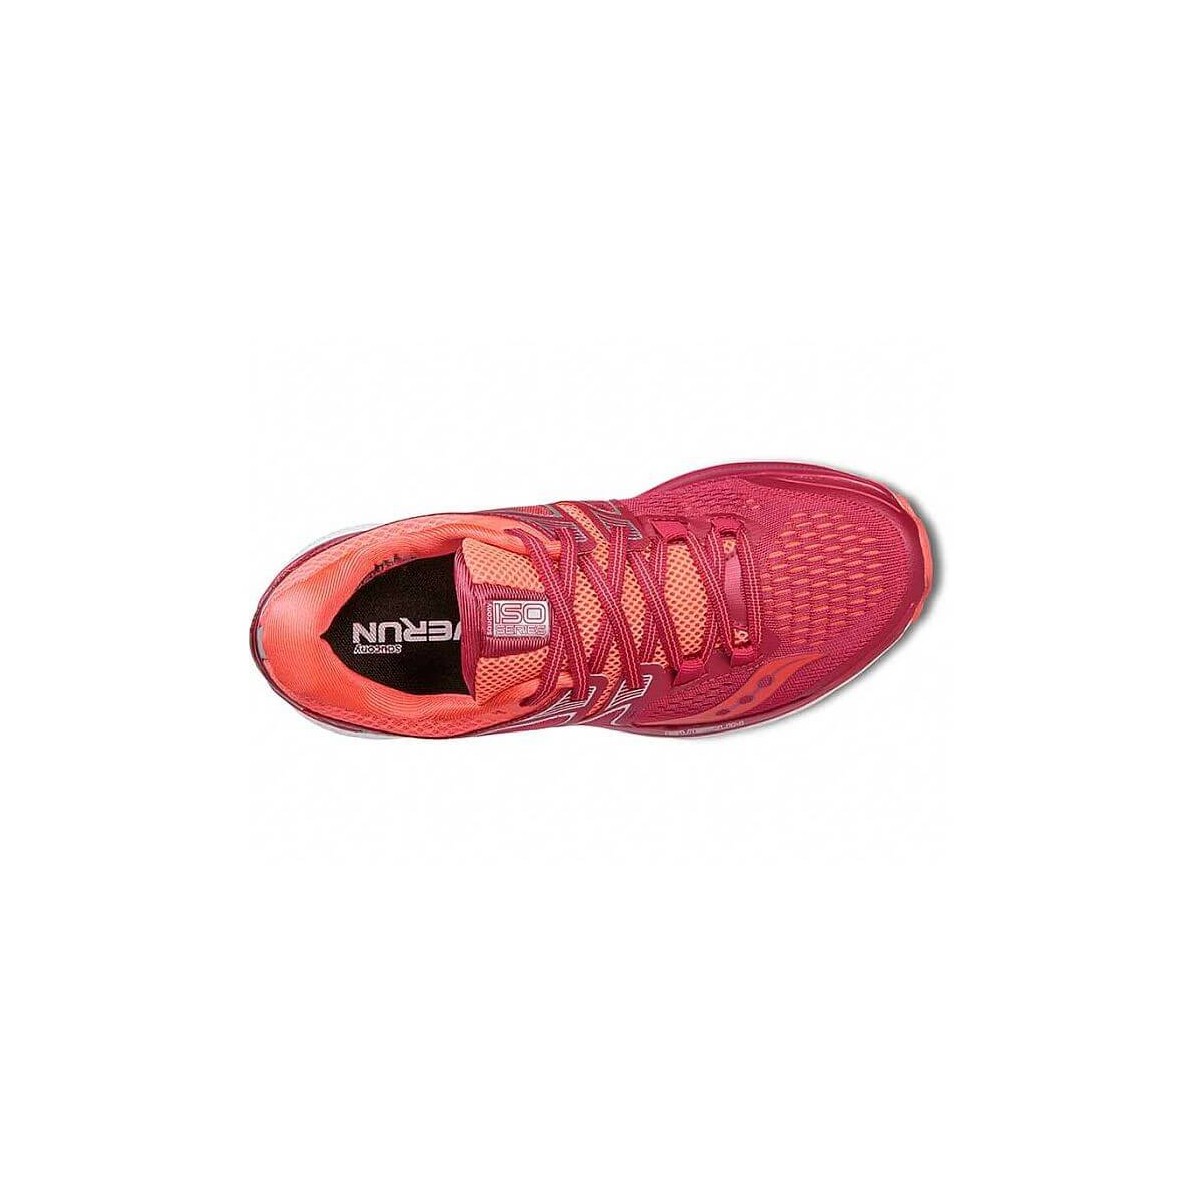 saucony triumph 6 mujer 2015